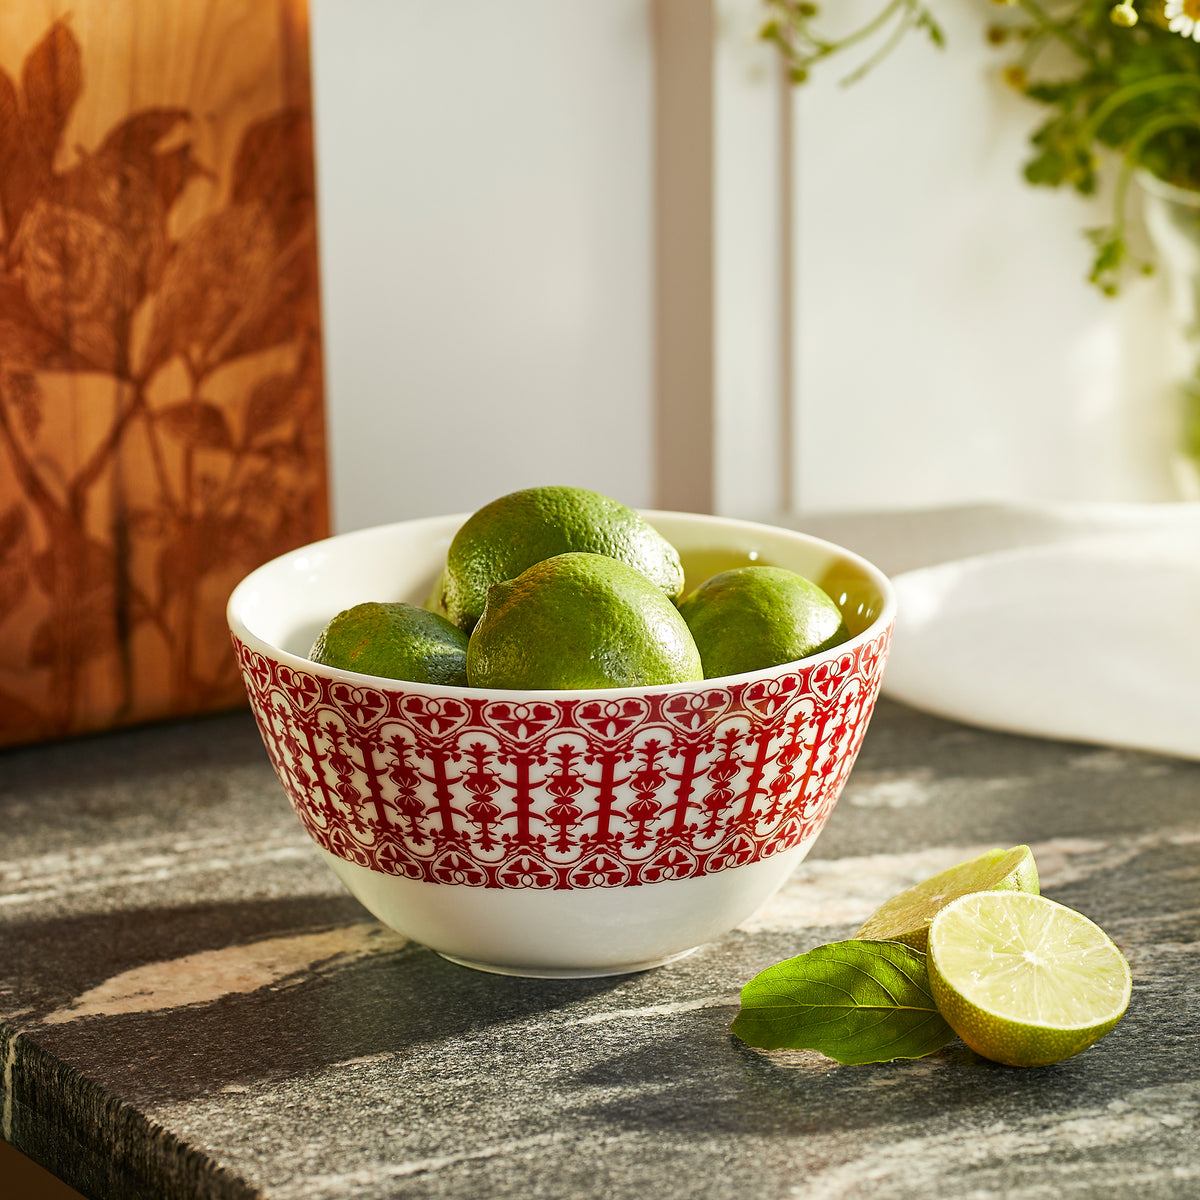 A **Casablanca Crimson Cereal Bowl by Caskata**, filled with green limes sits on a kitchen countertop near a halved lime and a basil sprig. Its high-fired porcelain finish adds an elegant touch to the scene.